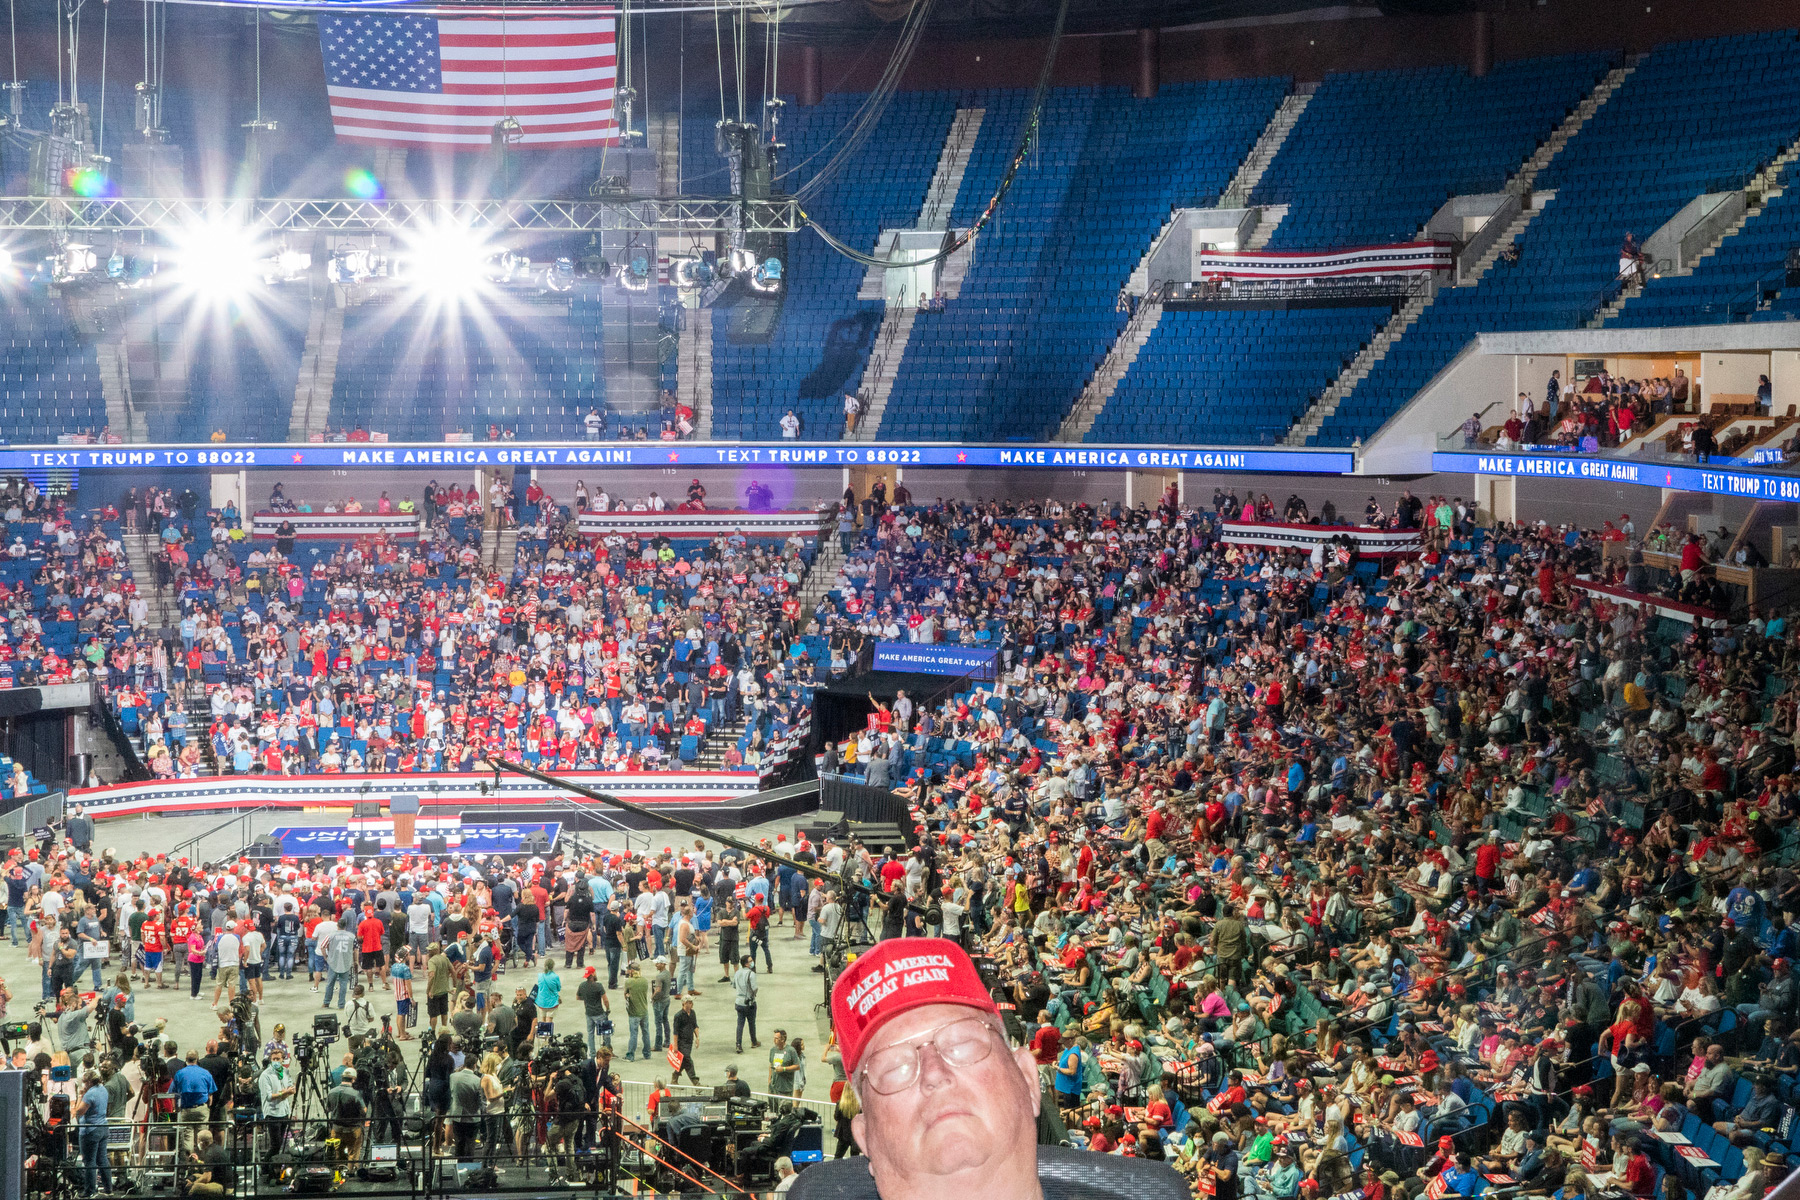 <strong>Tulsa, June 20, 2020.</strong> "I feel like this country is increasingly living in parallel worlds. The Trump rally today was bizarre. Indoors, everyone bunched together, barely anybody wearing a mask. I looked like an alien in my respirator and goggles. I was mocked a bit, and responded with my story of seeing trucks filled with bodies in New York at the height of the pandemic's first wave in America. I suppose this will be a super-spreader event. George Floyd was not mentioned even once. As people started to stream out during the 90-minute speech, I left to see if there would be confrontations with protesters. There were some scattered shouting matches and a bit of scuffling, but mostly the two groups left one another alone. One attendee of the rally carried a handmade cross, and a protester tried to snatch it out of his hand. He yanked it back, held it in the air and started chanting, 'Peace, peace, peace.' The crowd of protesters and Trump supporters around him took up the chant, filling the air. That night, my colleague Ruddy Roye and I sat down with some Trump supporters at our hotel and had drinks. It was a surprisingly thoughtful and nuanced conversation." (Peter van Agtmael—Magnum Photos for TIME)